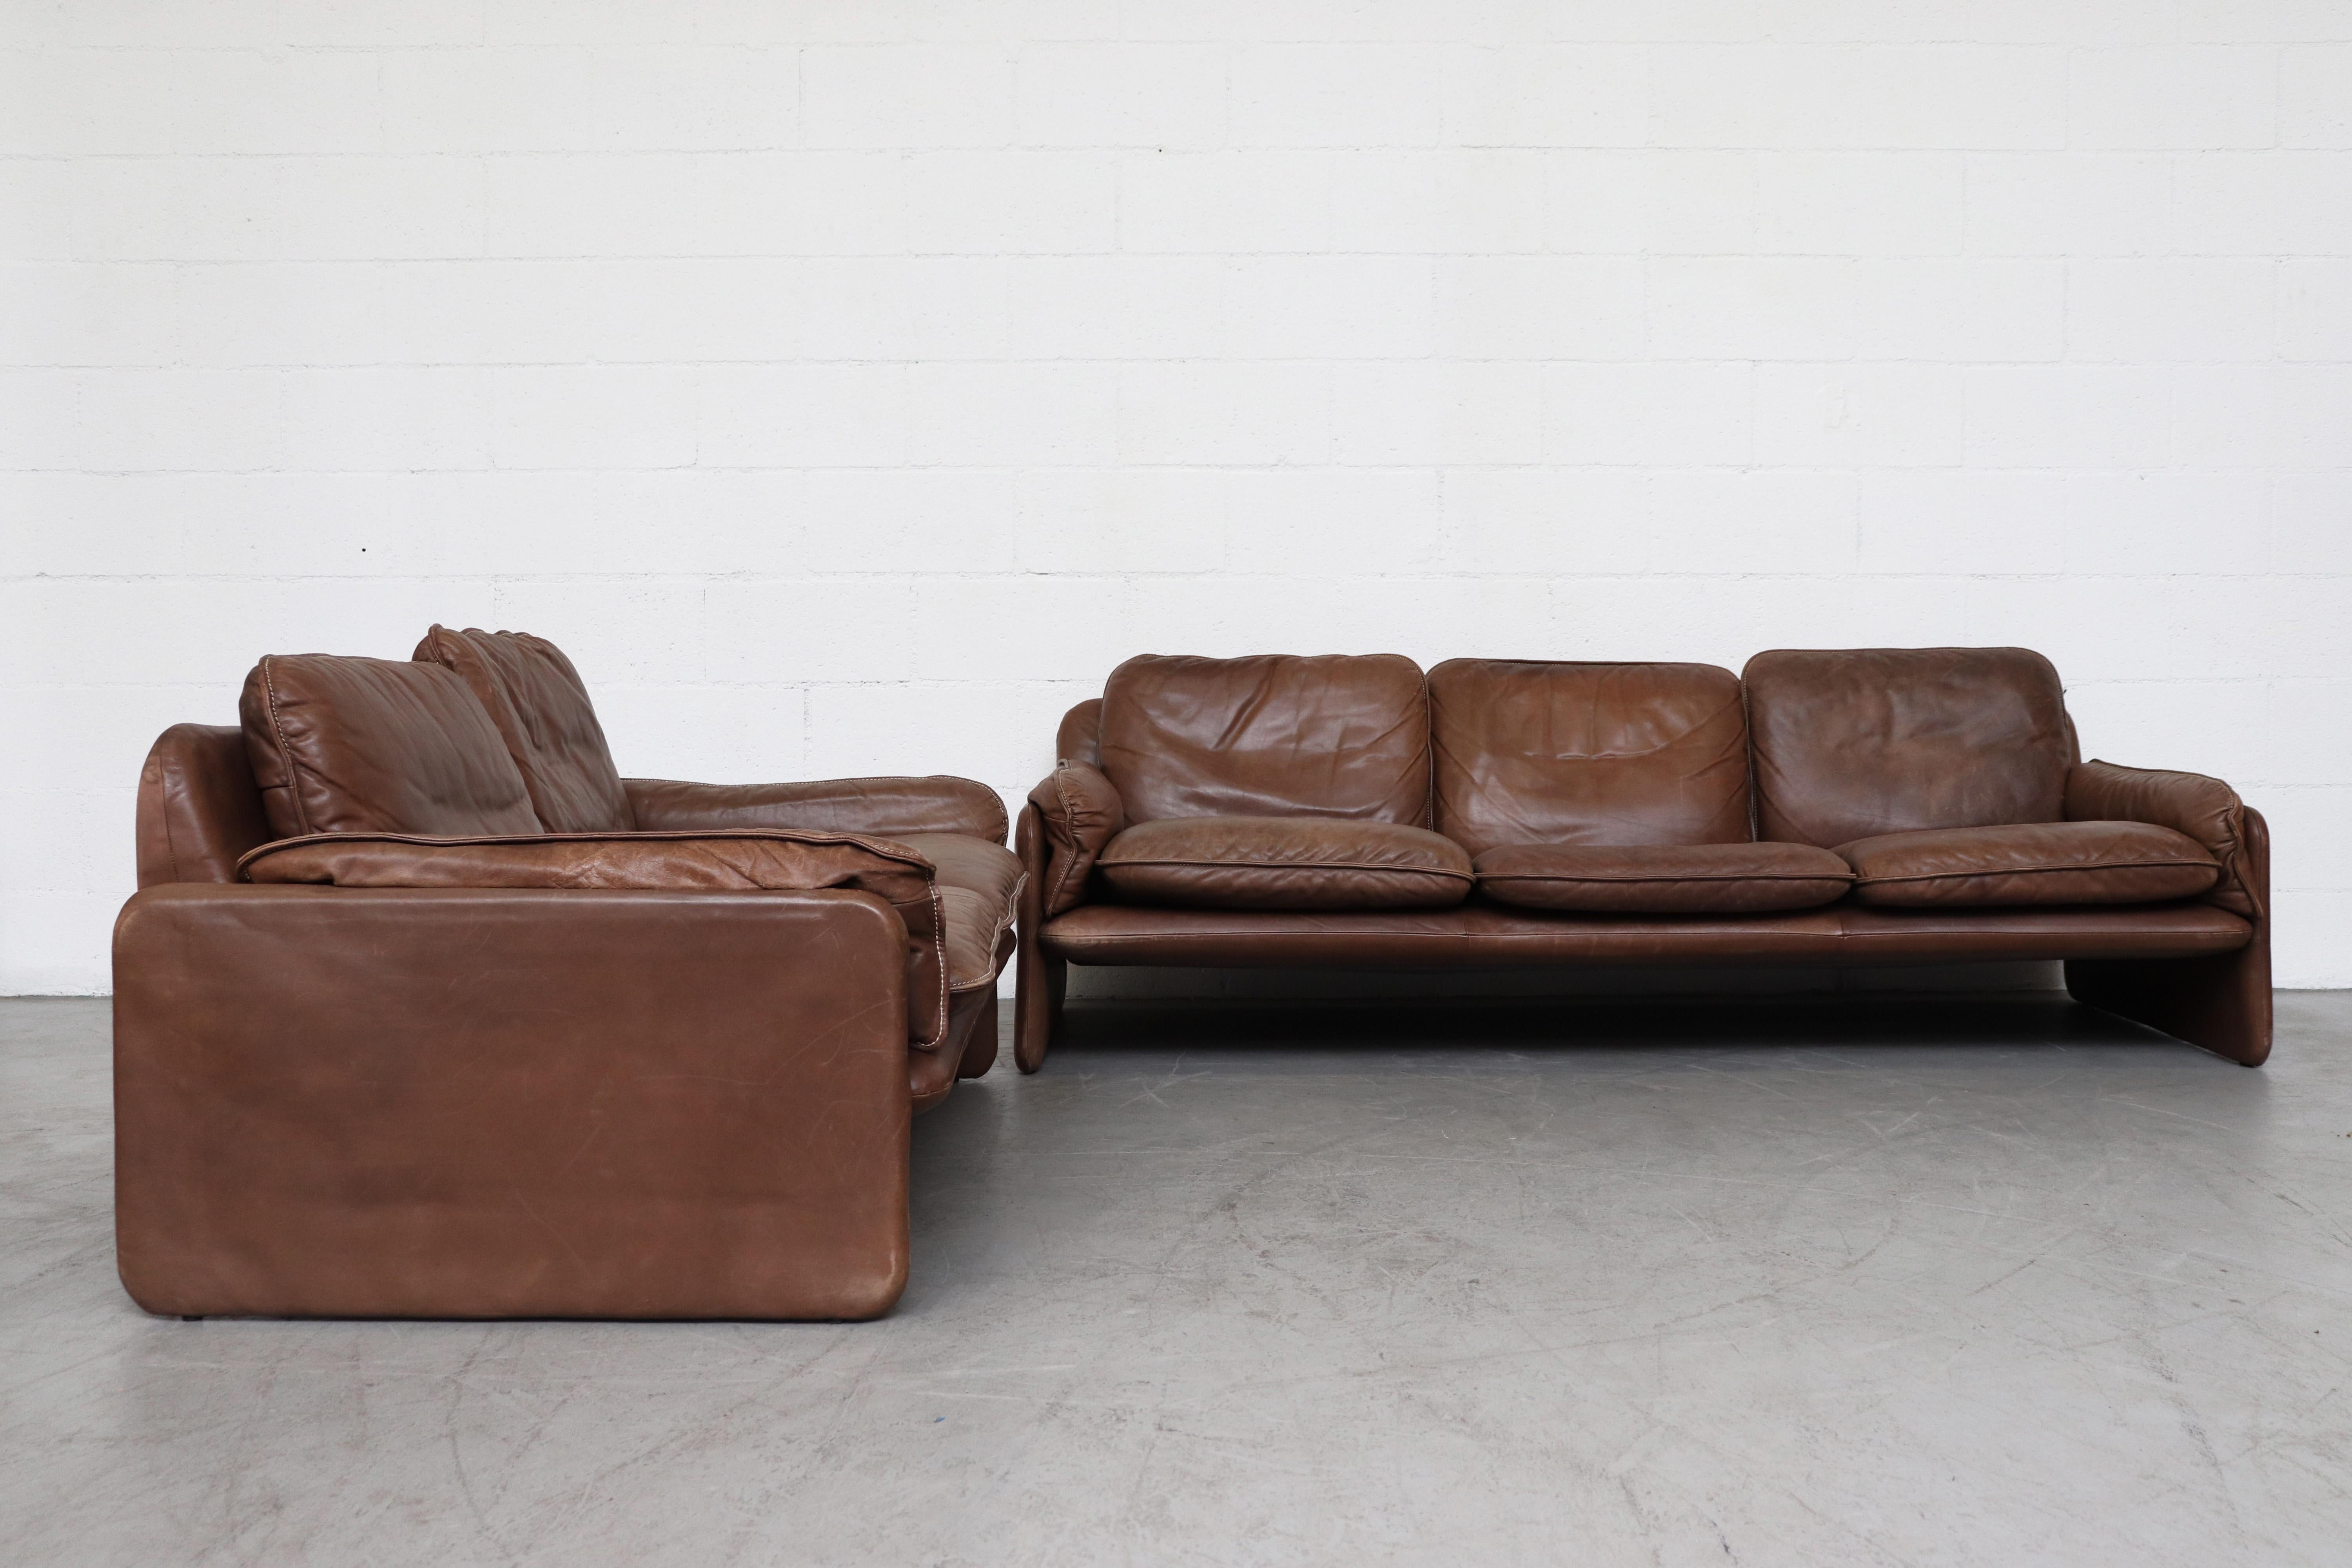 De Sede DS61 brown leather 3-seat sofa with off-white stitching. In original condition with nice patina and visible signs of wear. Small tear at underside of arm rest  near  the seam. Not extremely visible. Wear is consistent with its age and usage.